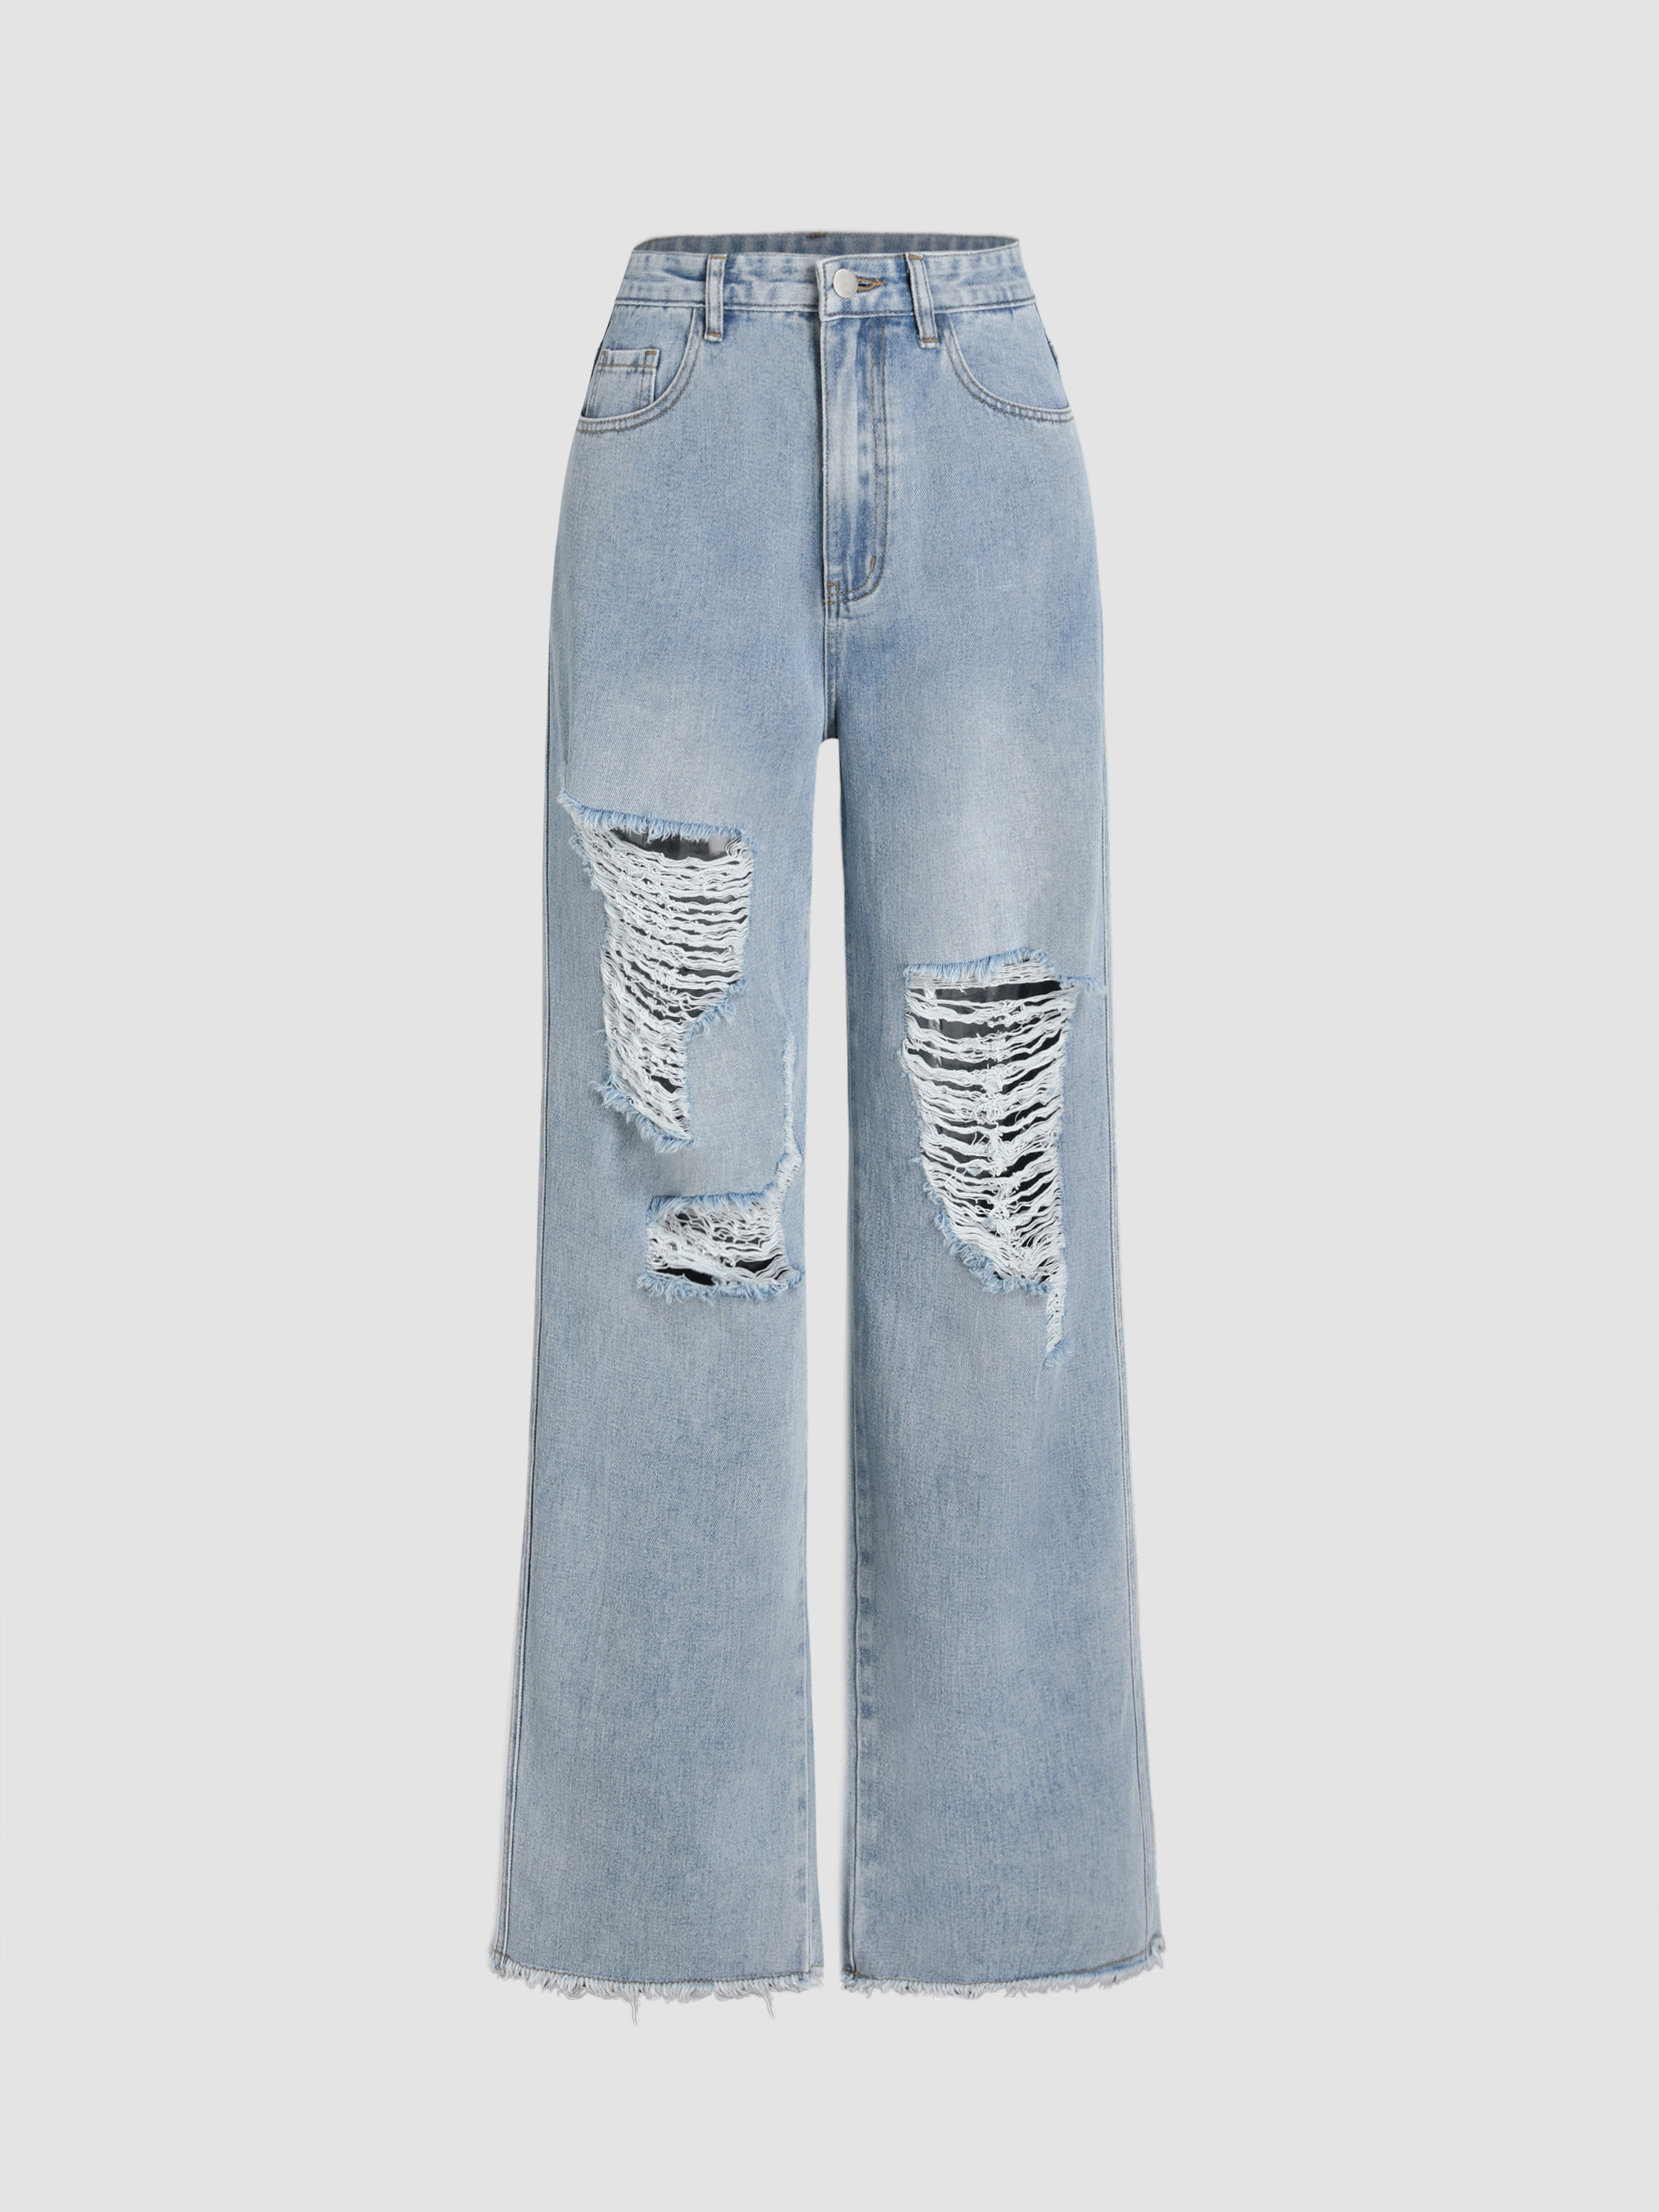 High Waist Straight Denim Mom Pants For Women Fashionable Washed Blue  Cotton High Waisted Ripped Jeans For Casual And Formal Wear 210616 From  Lu02, $25.85